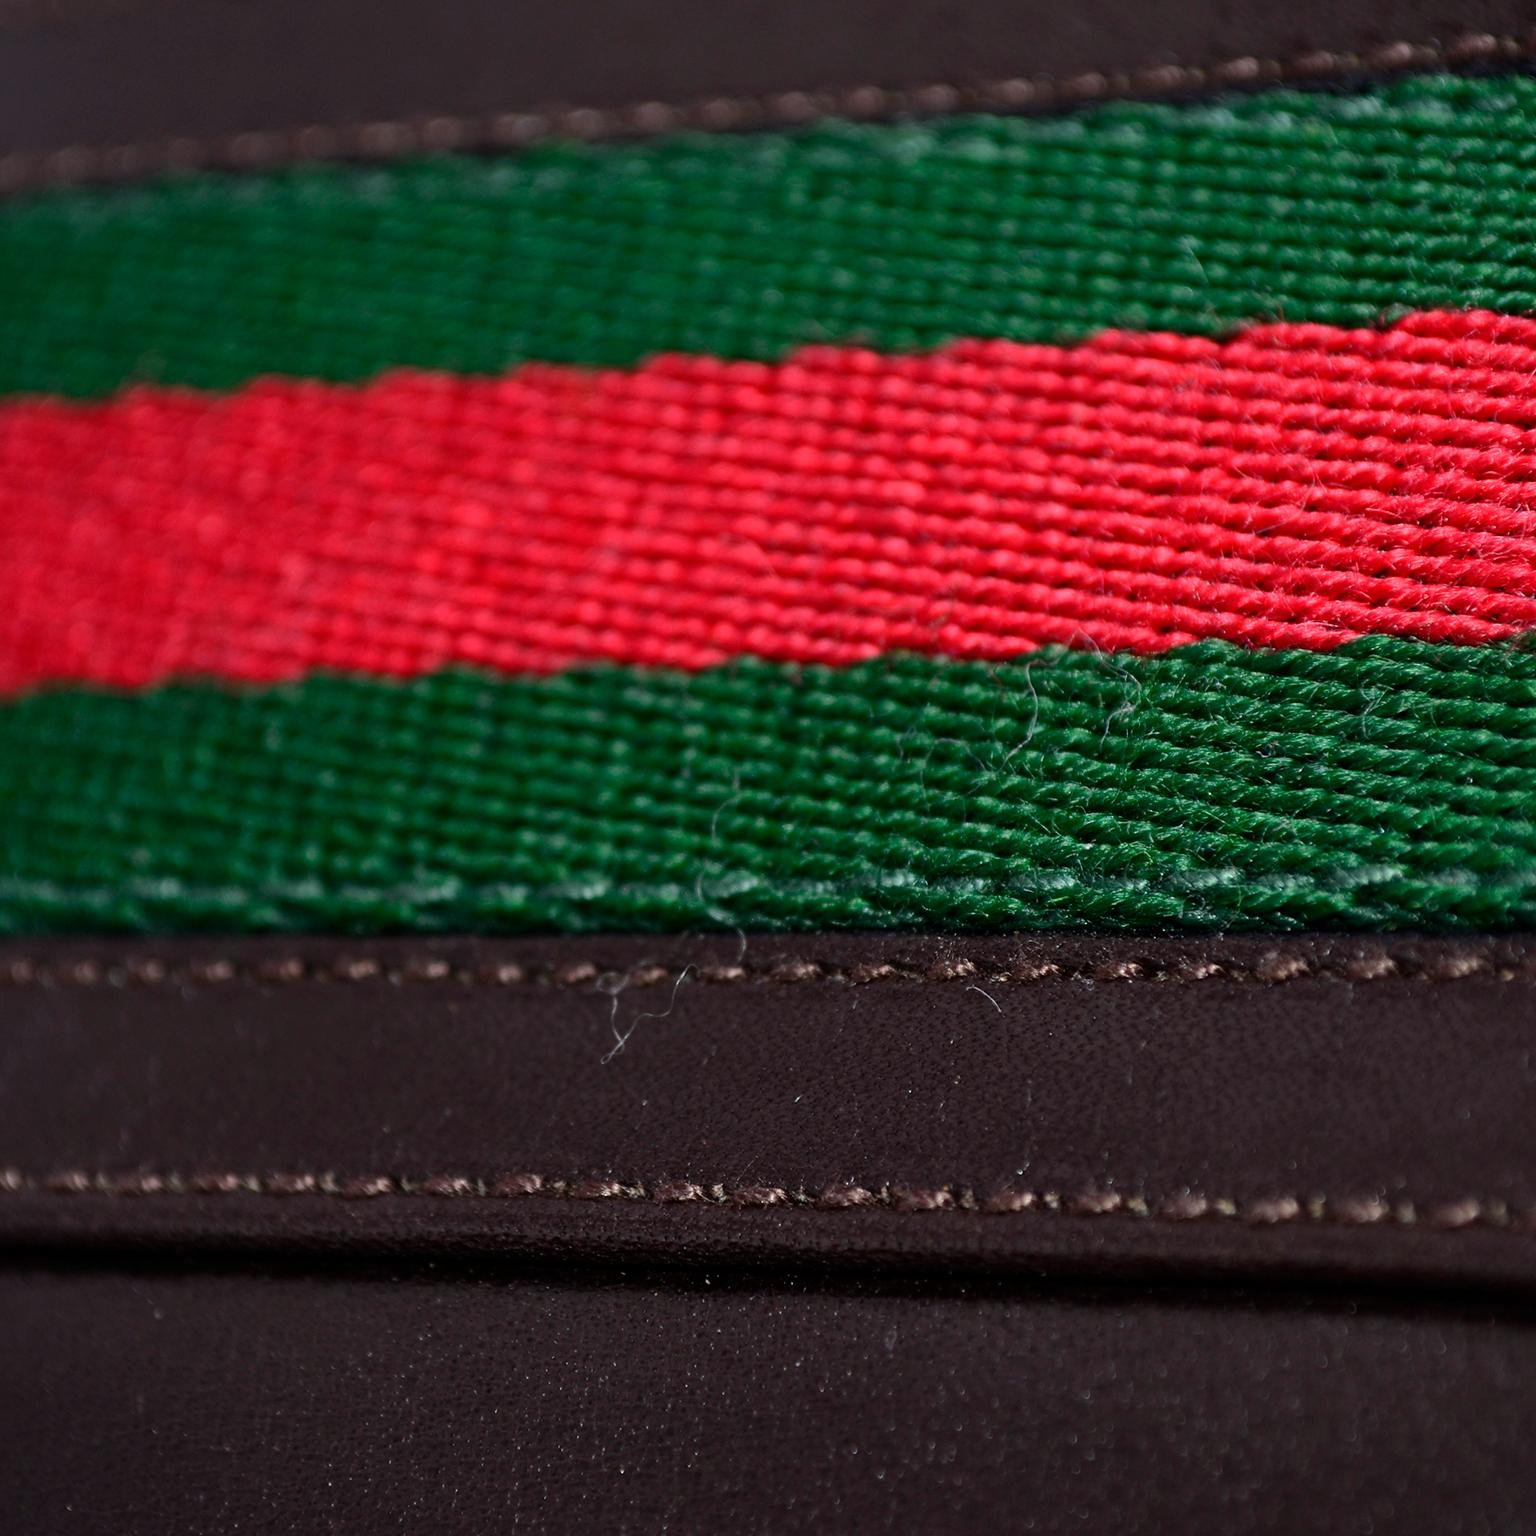 gucci red green stripe off 60% - www.intolegalworld.com